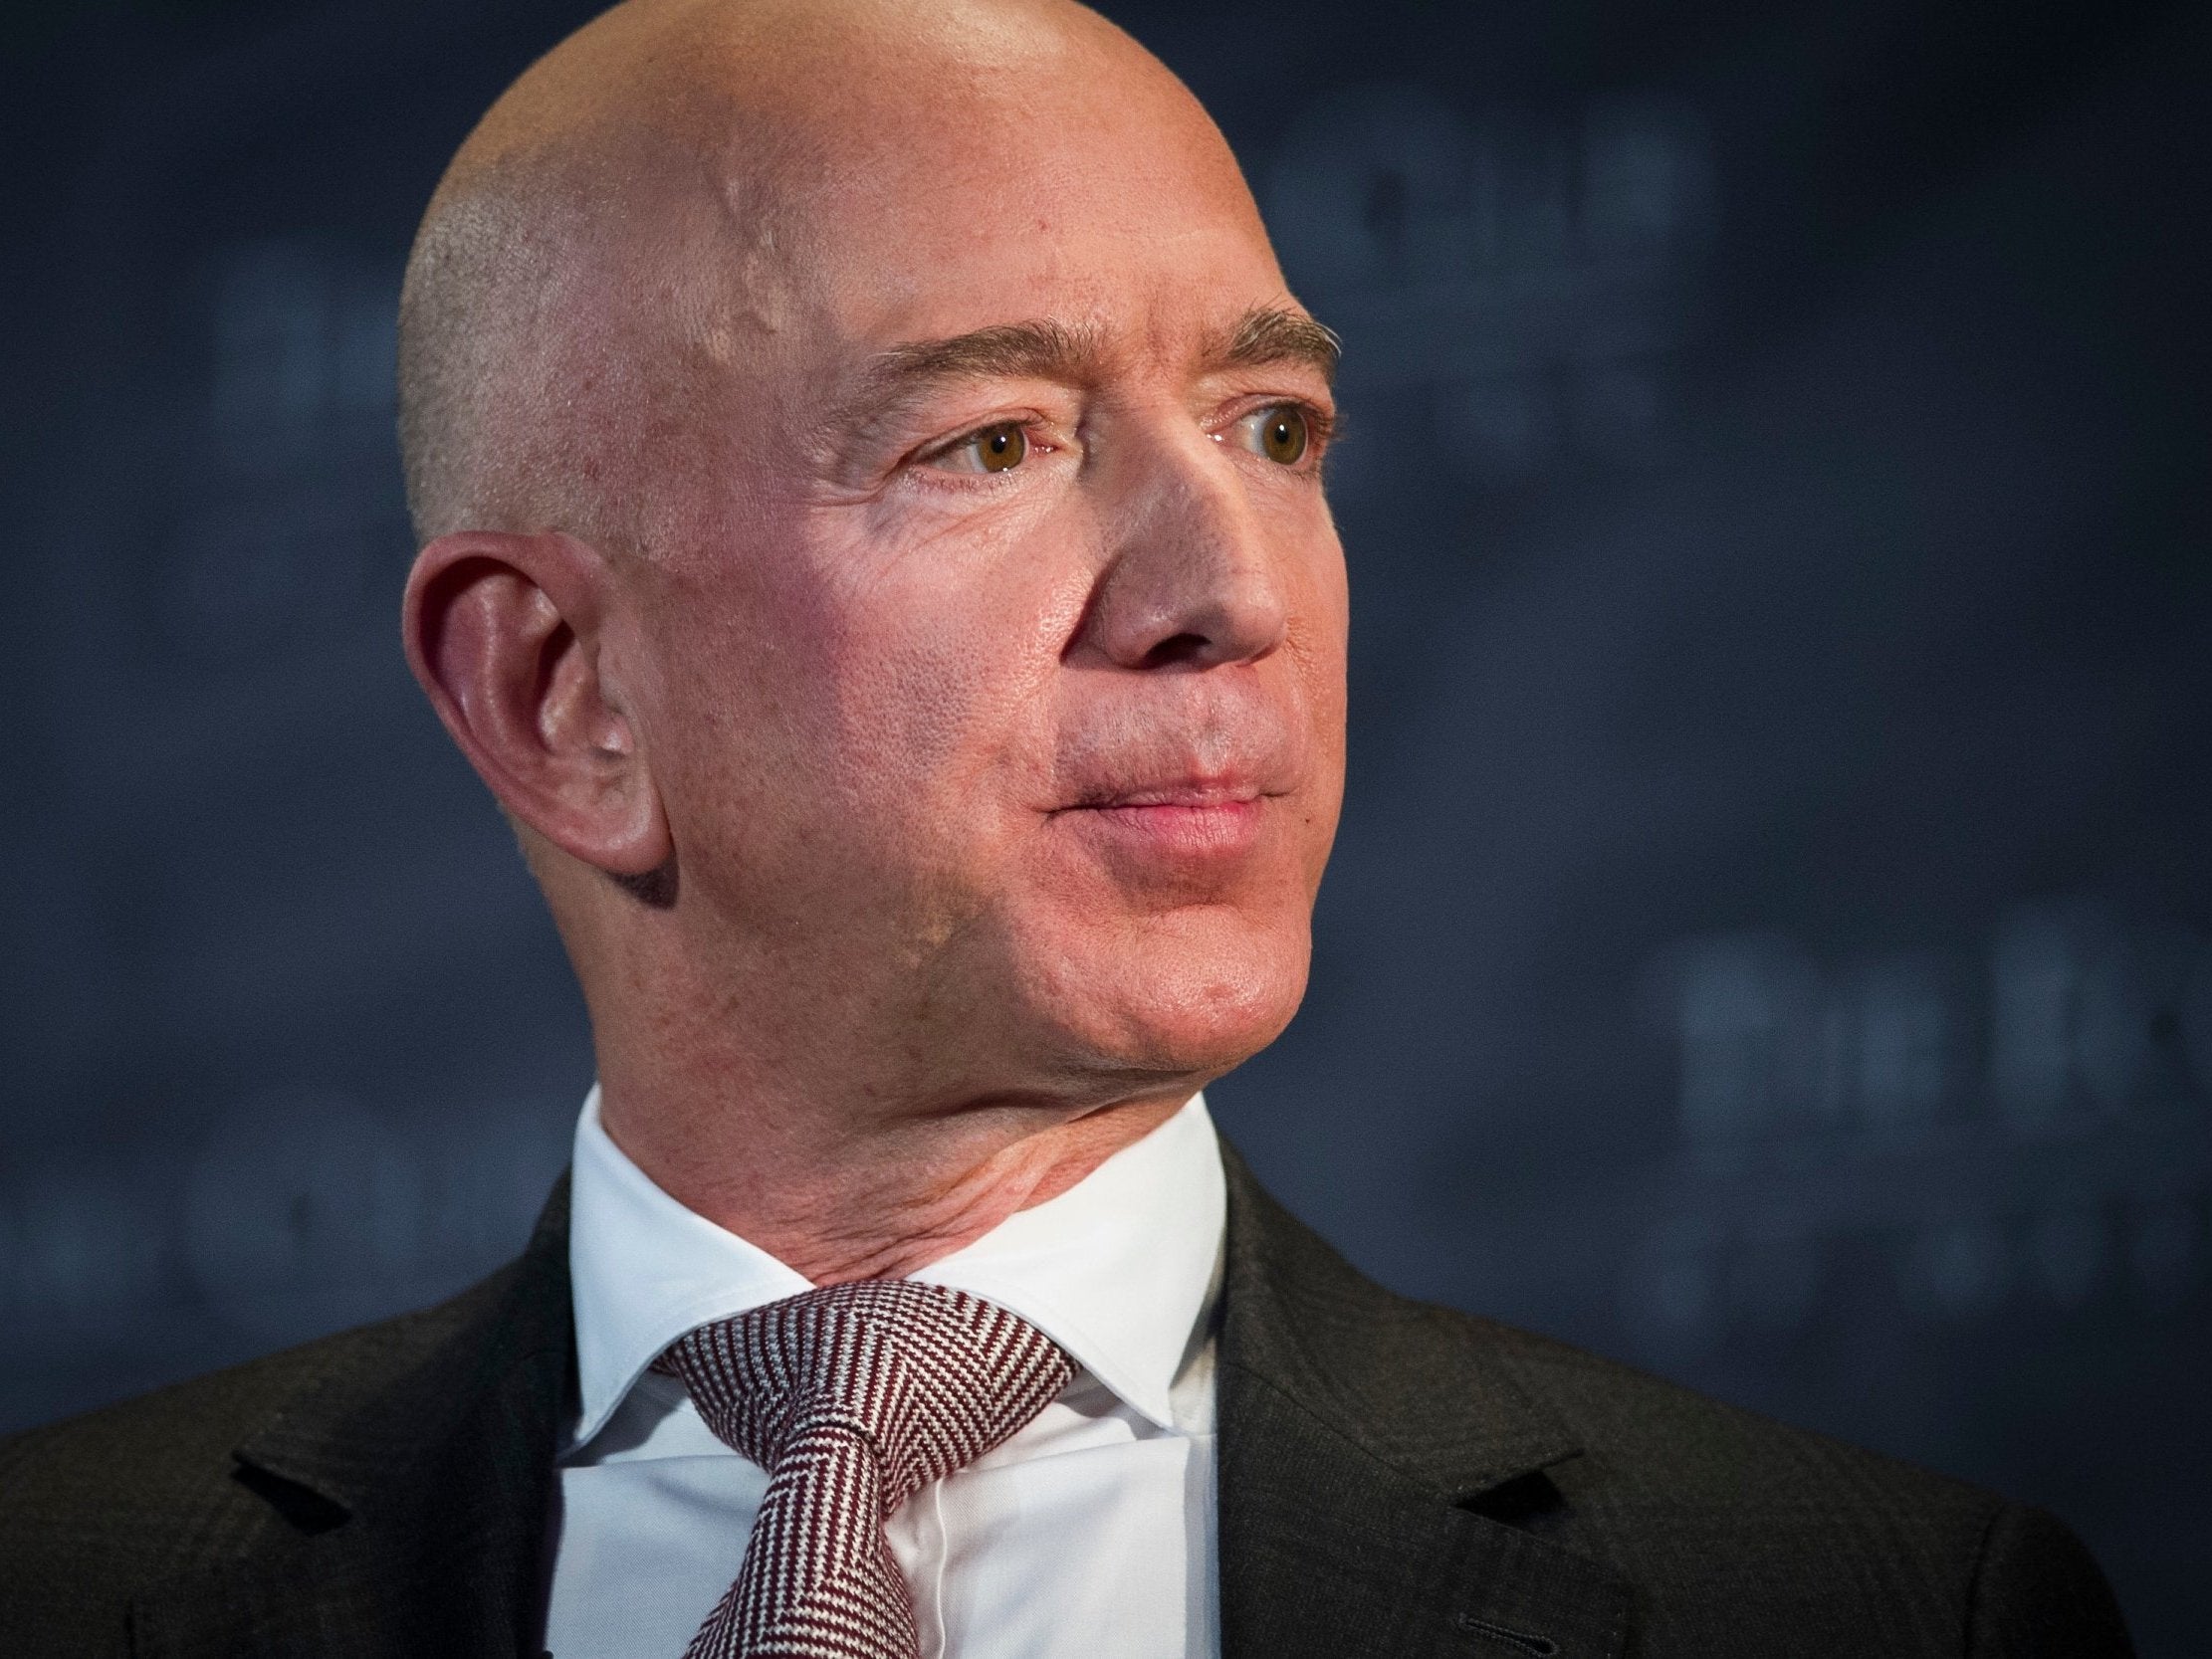 From humble beginnings to master of the universe: How did Jeff Bezos